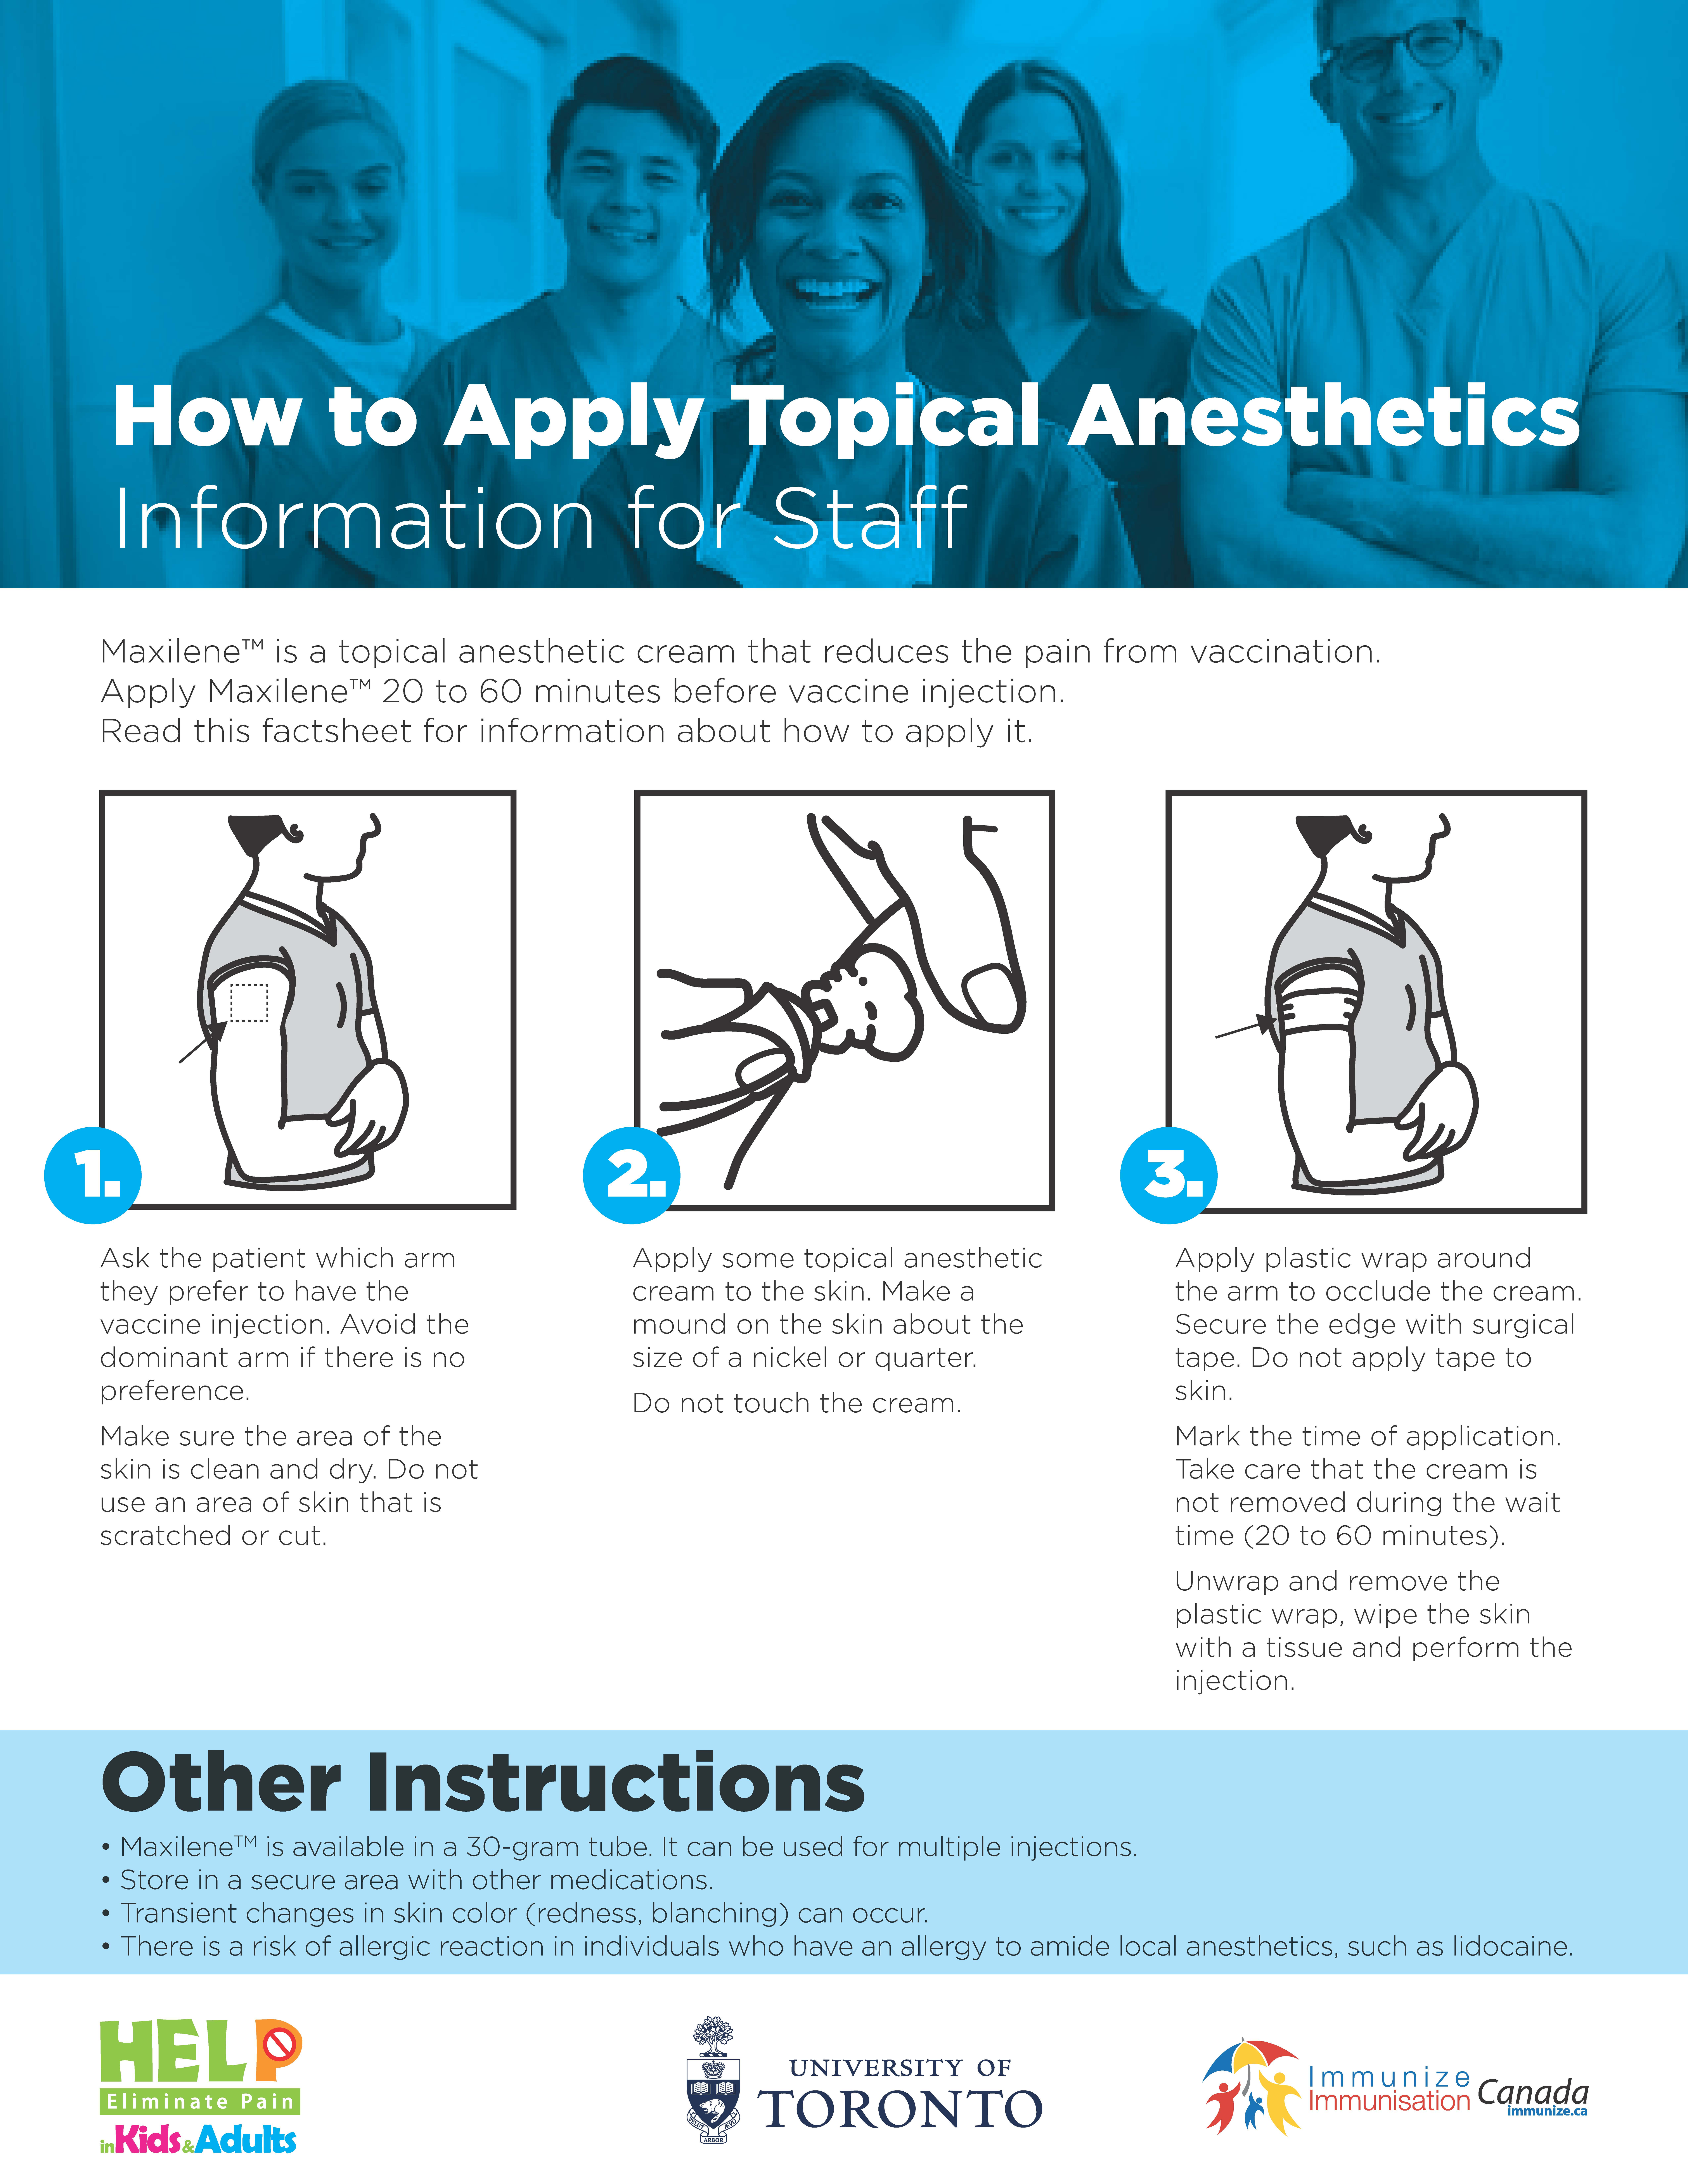 How to apply topical anesthetics: Information for staff